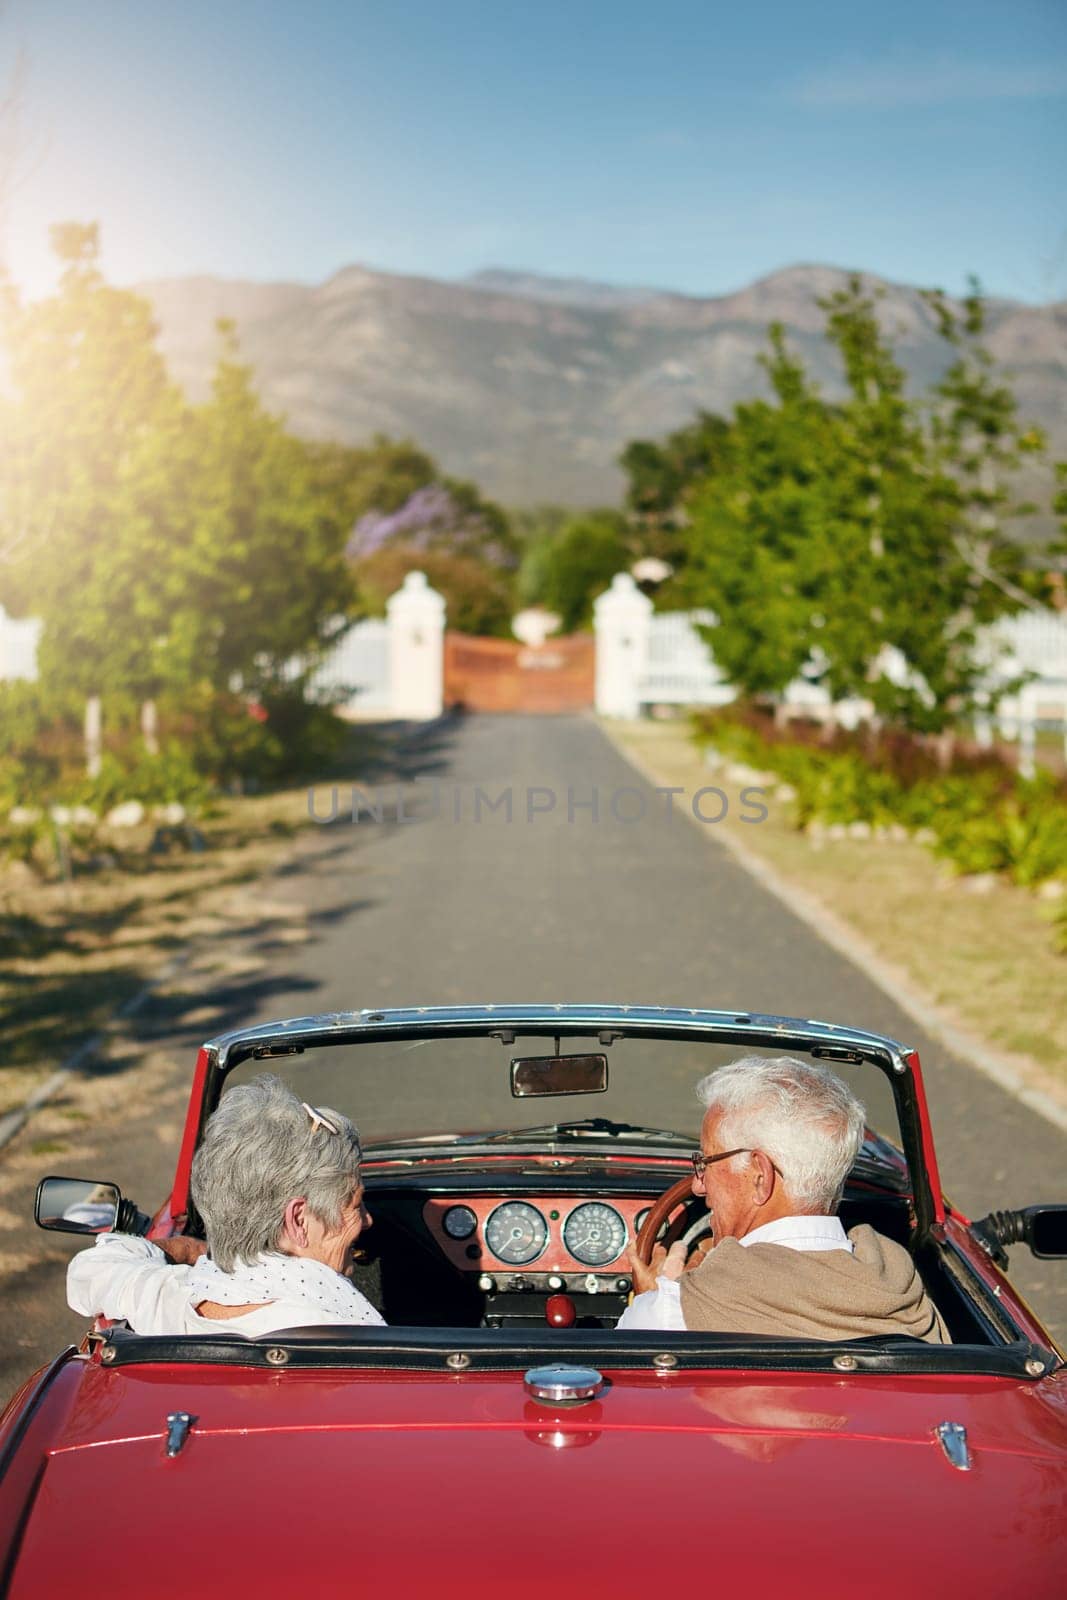 There are many ways to travel. a senior couple going on a road trip